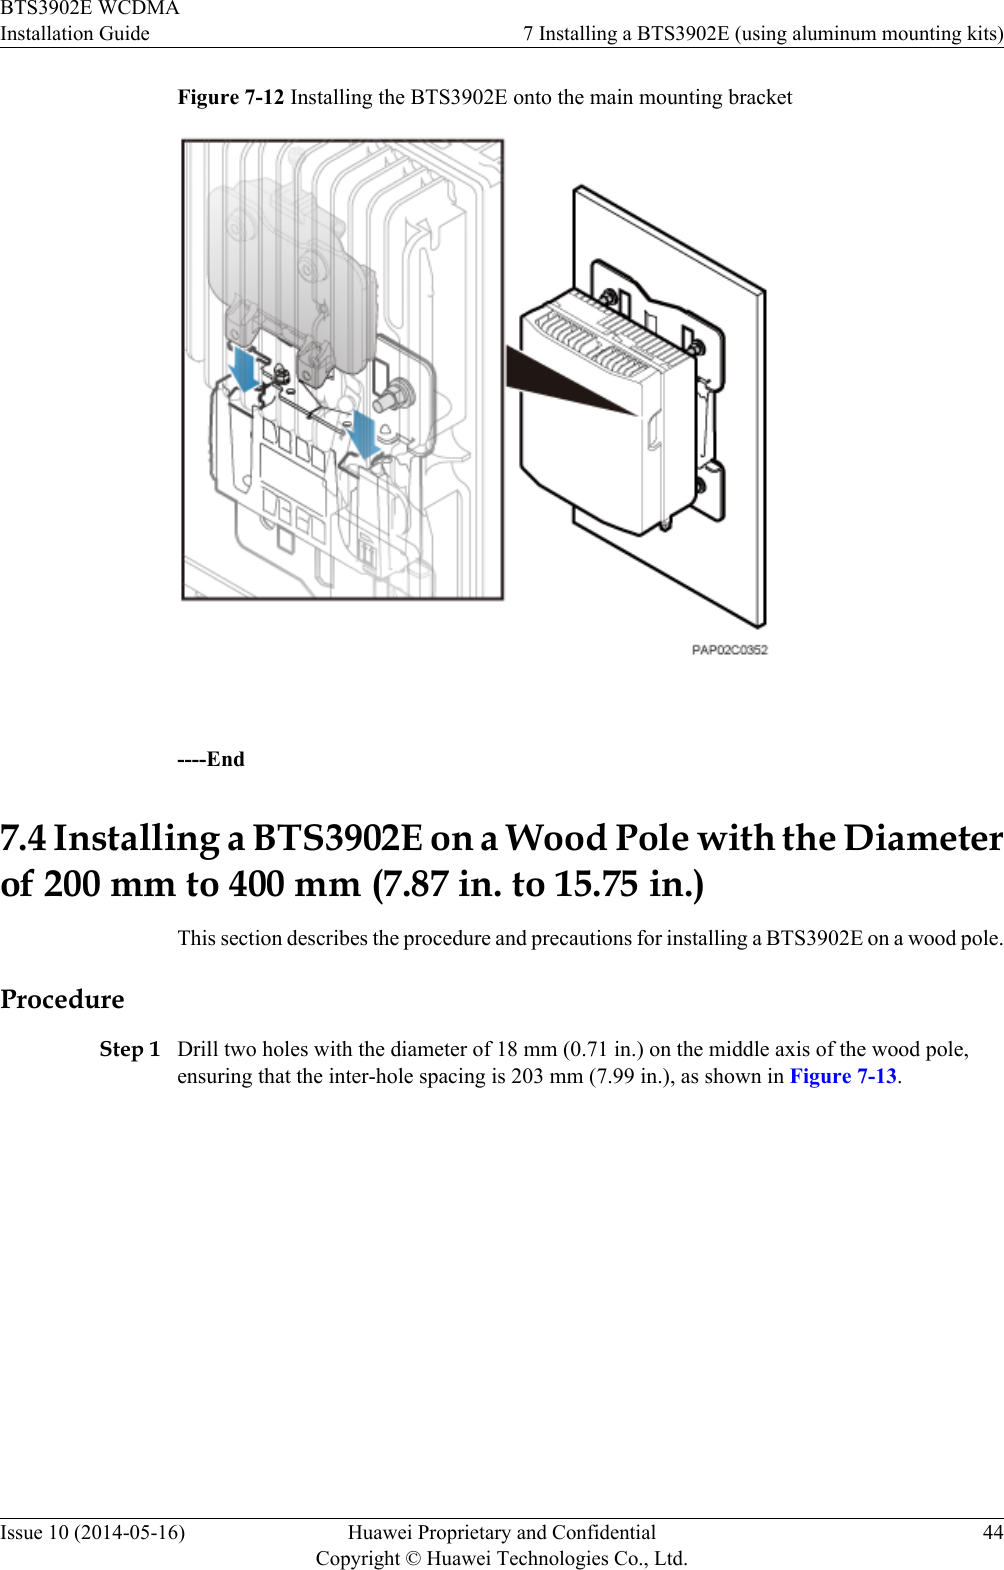 Figure 7-12 Installing the BTS3902E onto the main mounting bracket ----End7.4 Installing a BTS3902E on a Wood Pole with the Diameterof 200 mm to 400 mm (7.87 in. to 15.75 in.)This section describes the procedure and precautions for installing a BTS3902E on a wood pole.ProcedureStep 1 Drill two holes with the diameter of 18 mm (0.71 in.) on the middle axis of the wood pole,ensuring that the inter-hole spacing is 203 mm (7.99 in.), as shown in Figure 7-13.BTS3902E WCDMAInstallation Guide 7 Installing a BTS3902E (using aluminum mounting kits)Issue 10 (2014-05-16) Huawei Proprietary and ConfidentialCopyright © Huawei Technologies Co., Ltd.44